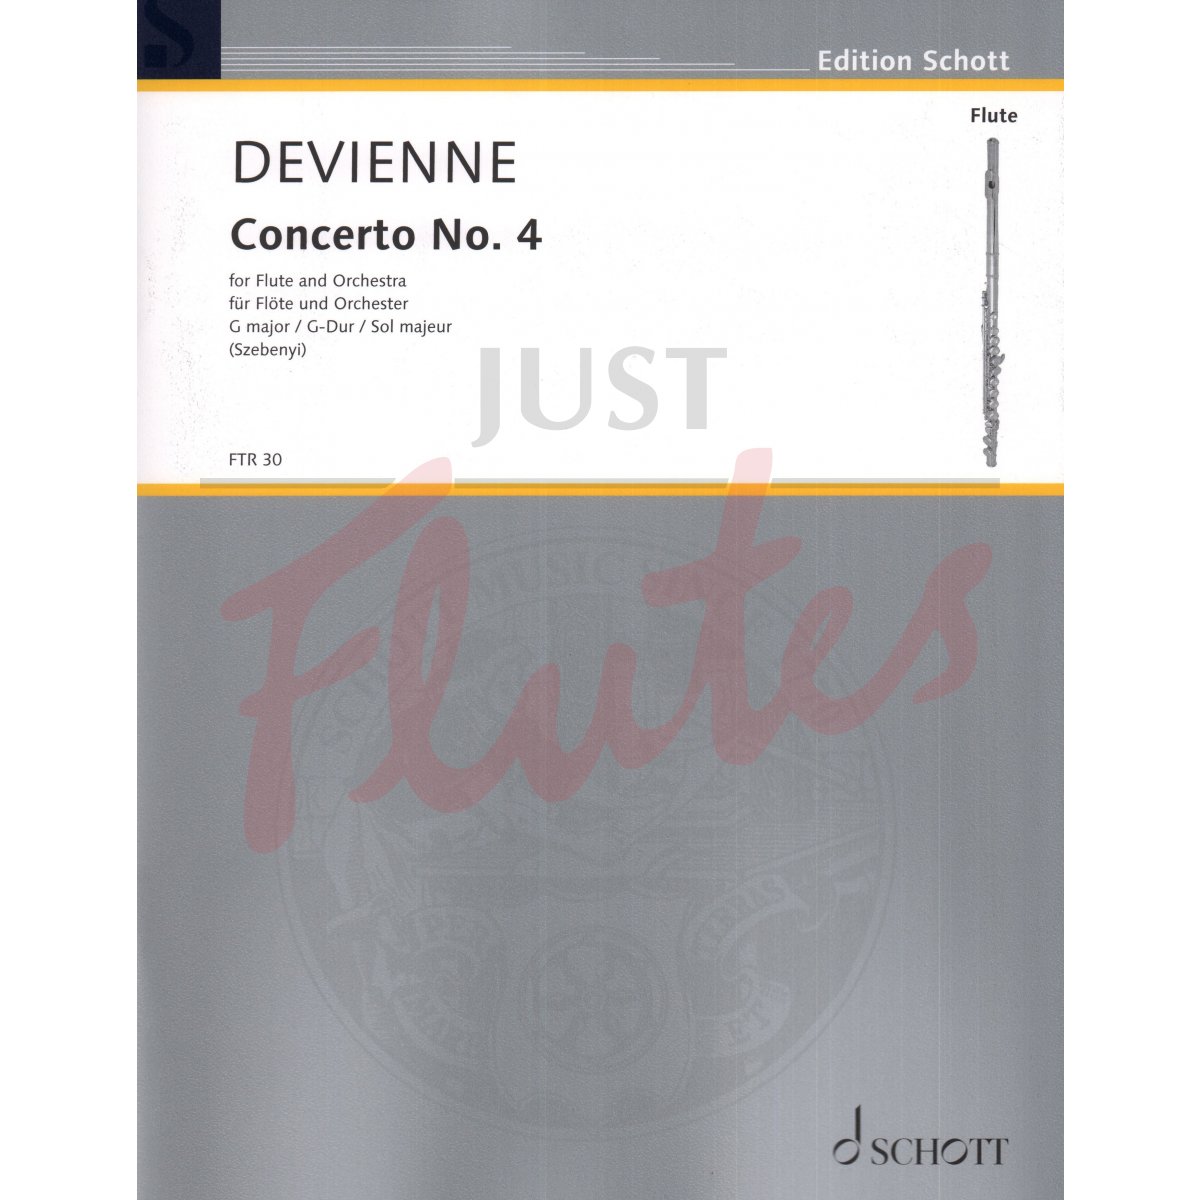 Concerto No. 4 in G major arranged for Flute and Piano